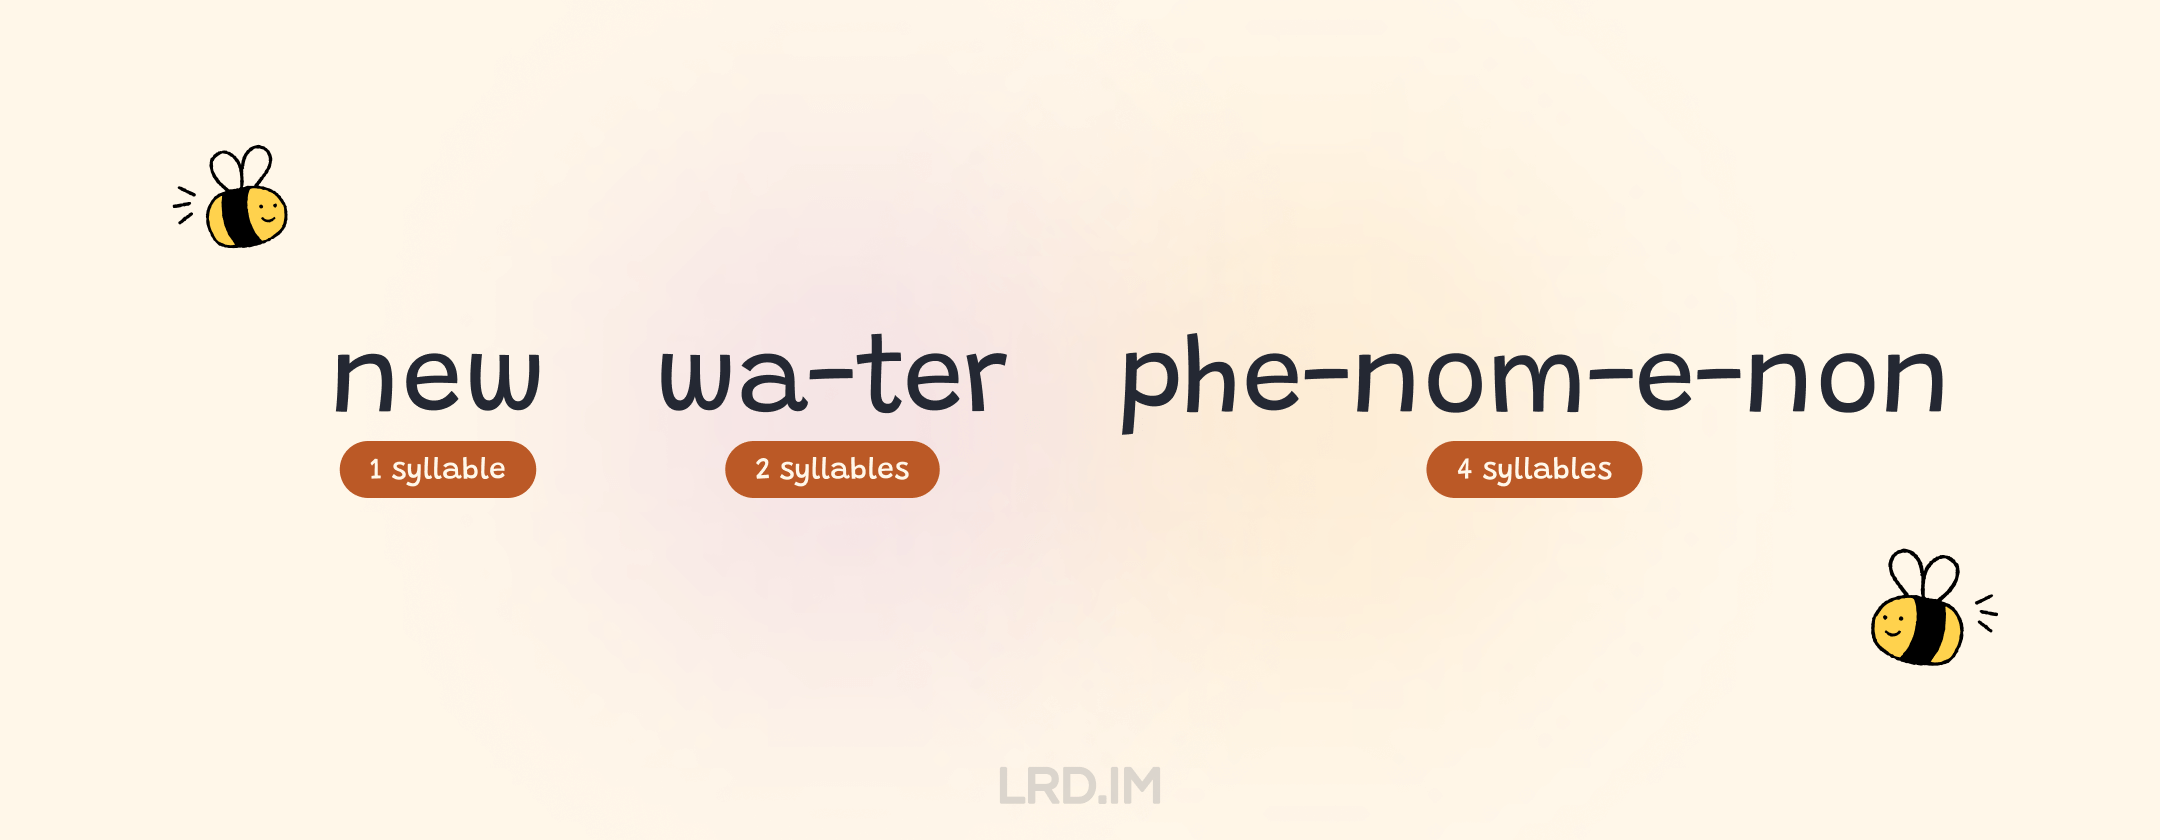 Syllable numbers of the word "the", "water" and "phenomenon"